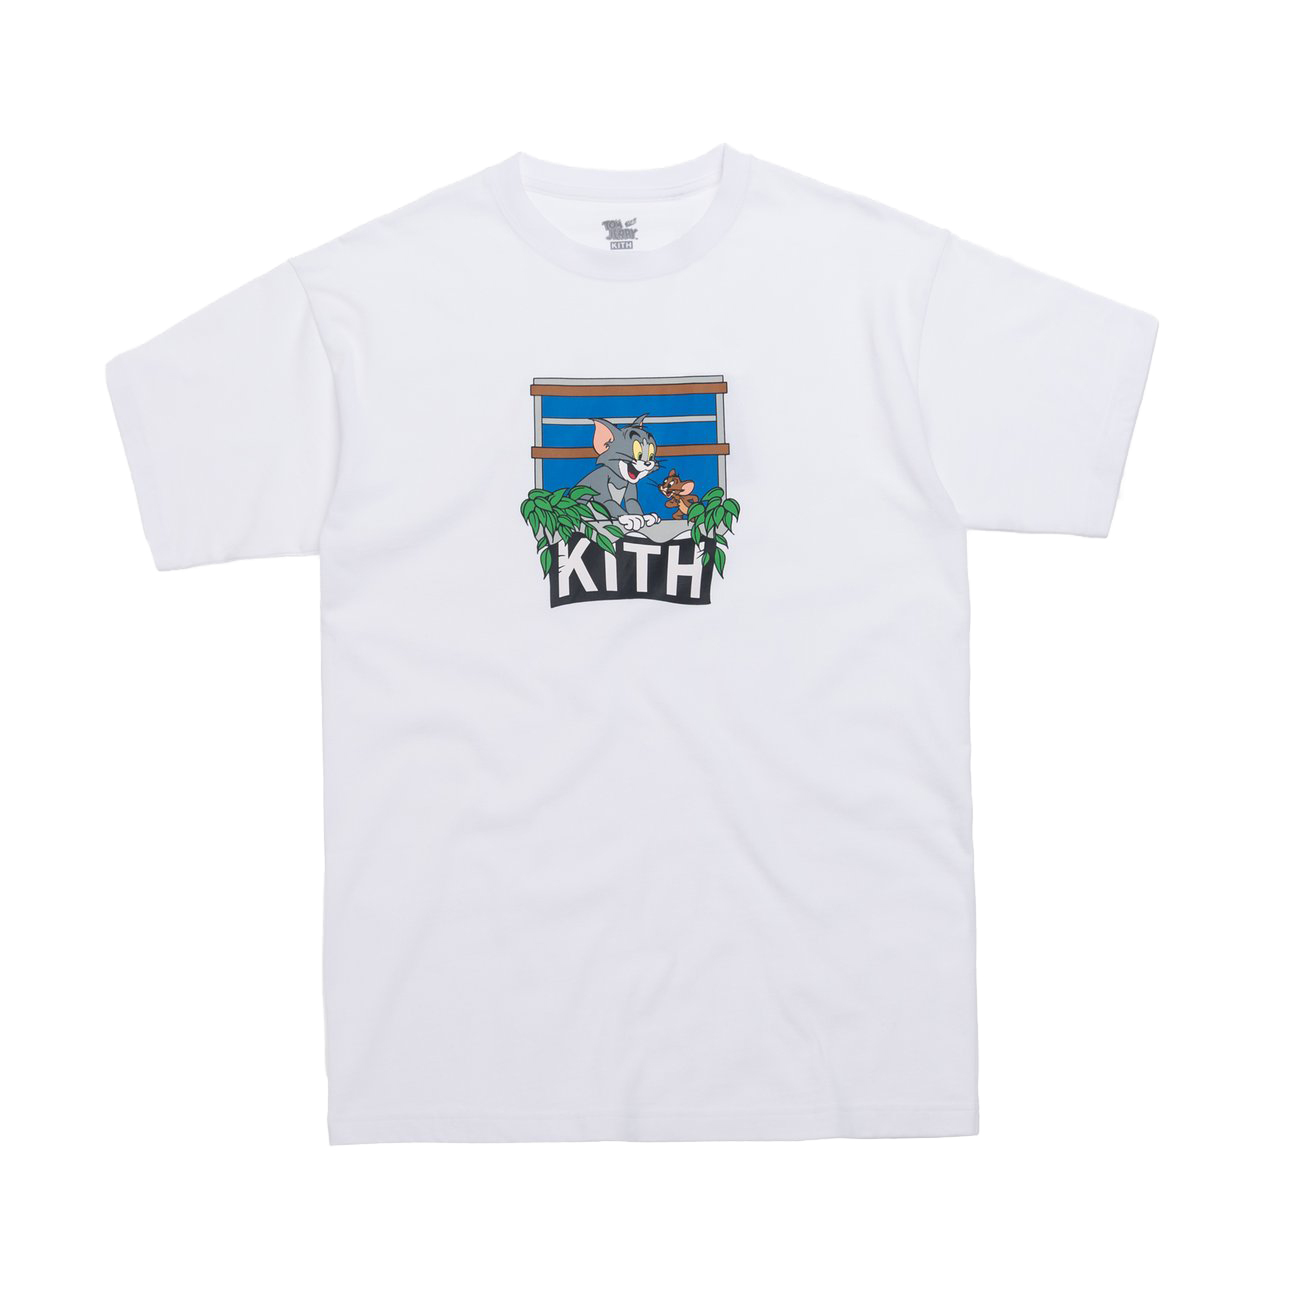 Kith x Tom u0026 Jerry Hang Out Tee White Men's - SS19 - US